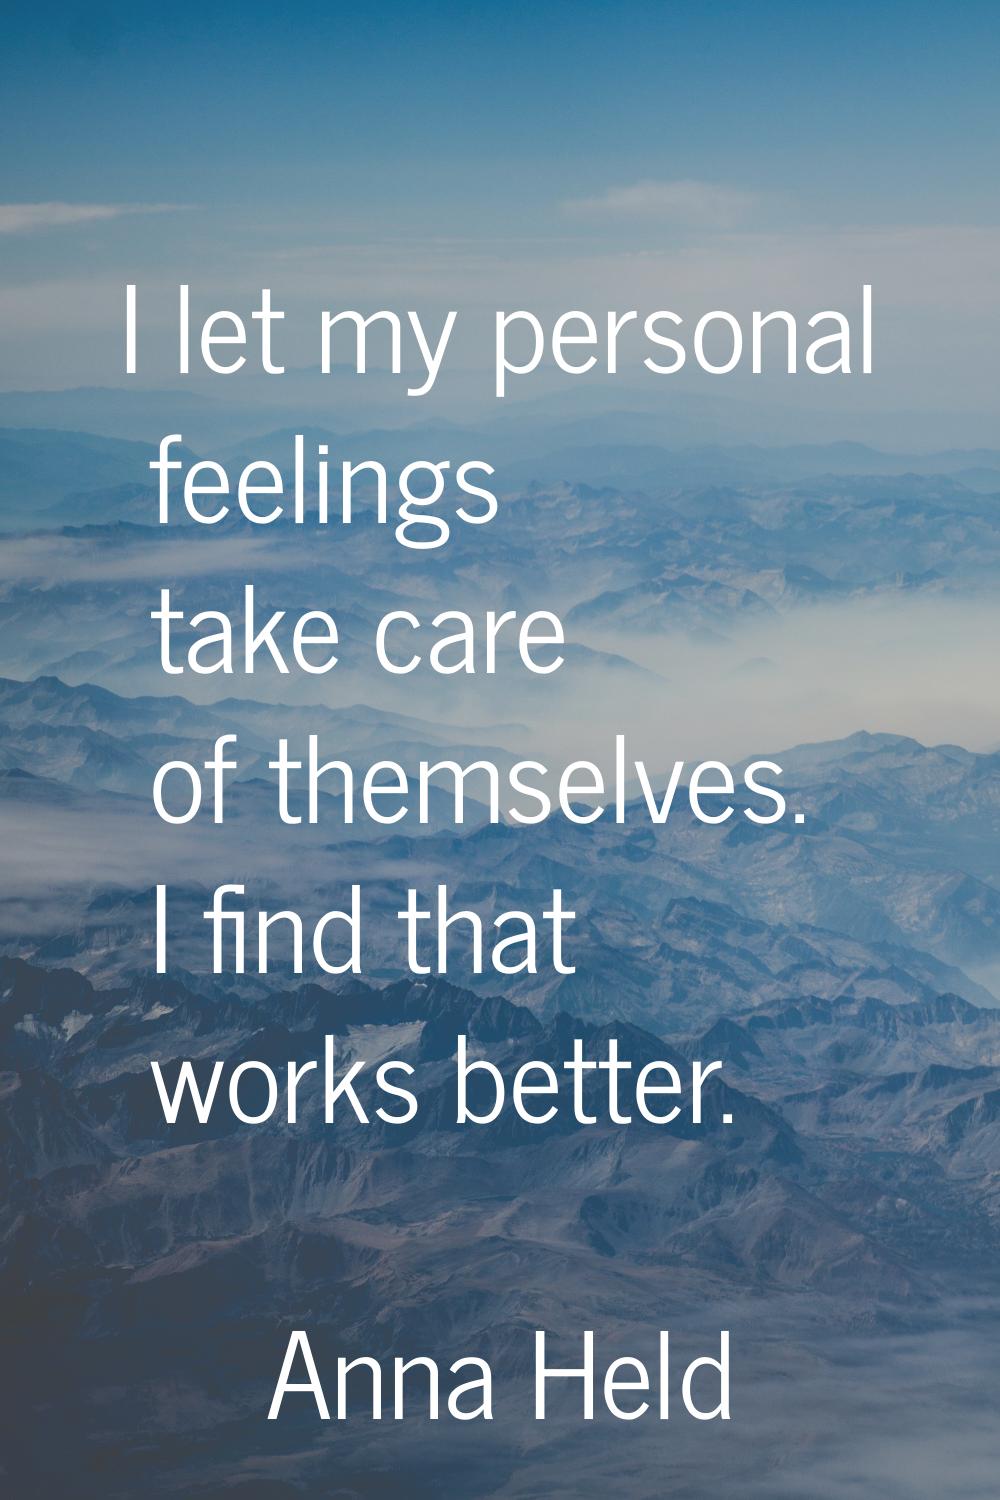 I let my personal feelings take care of themselves. I find that works better.